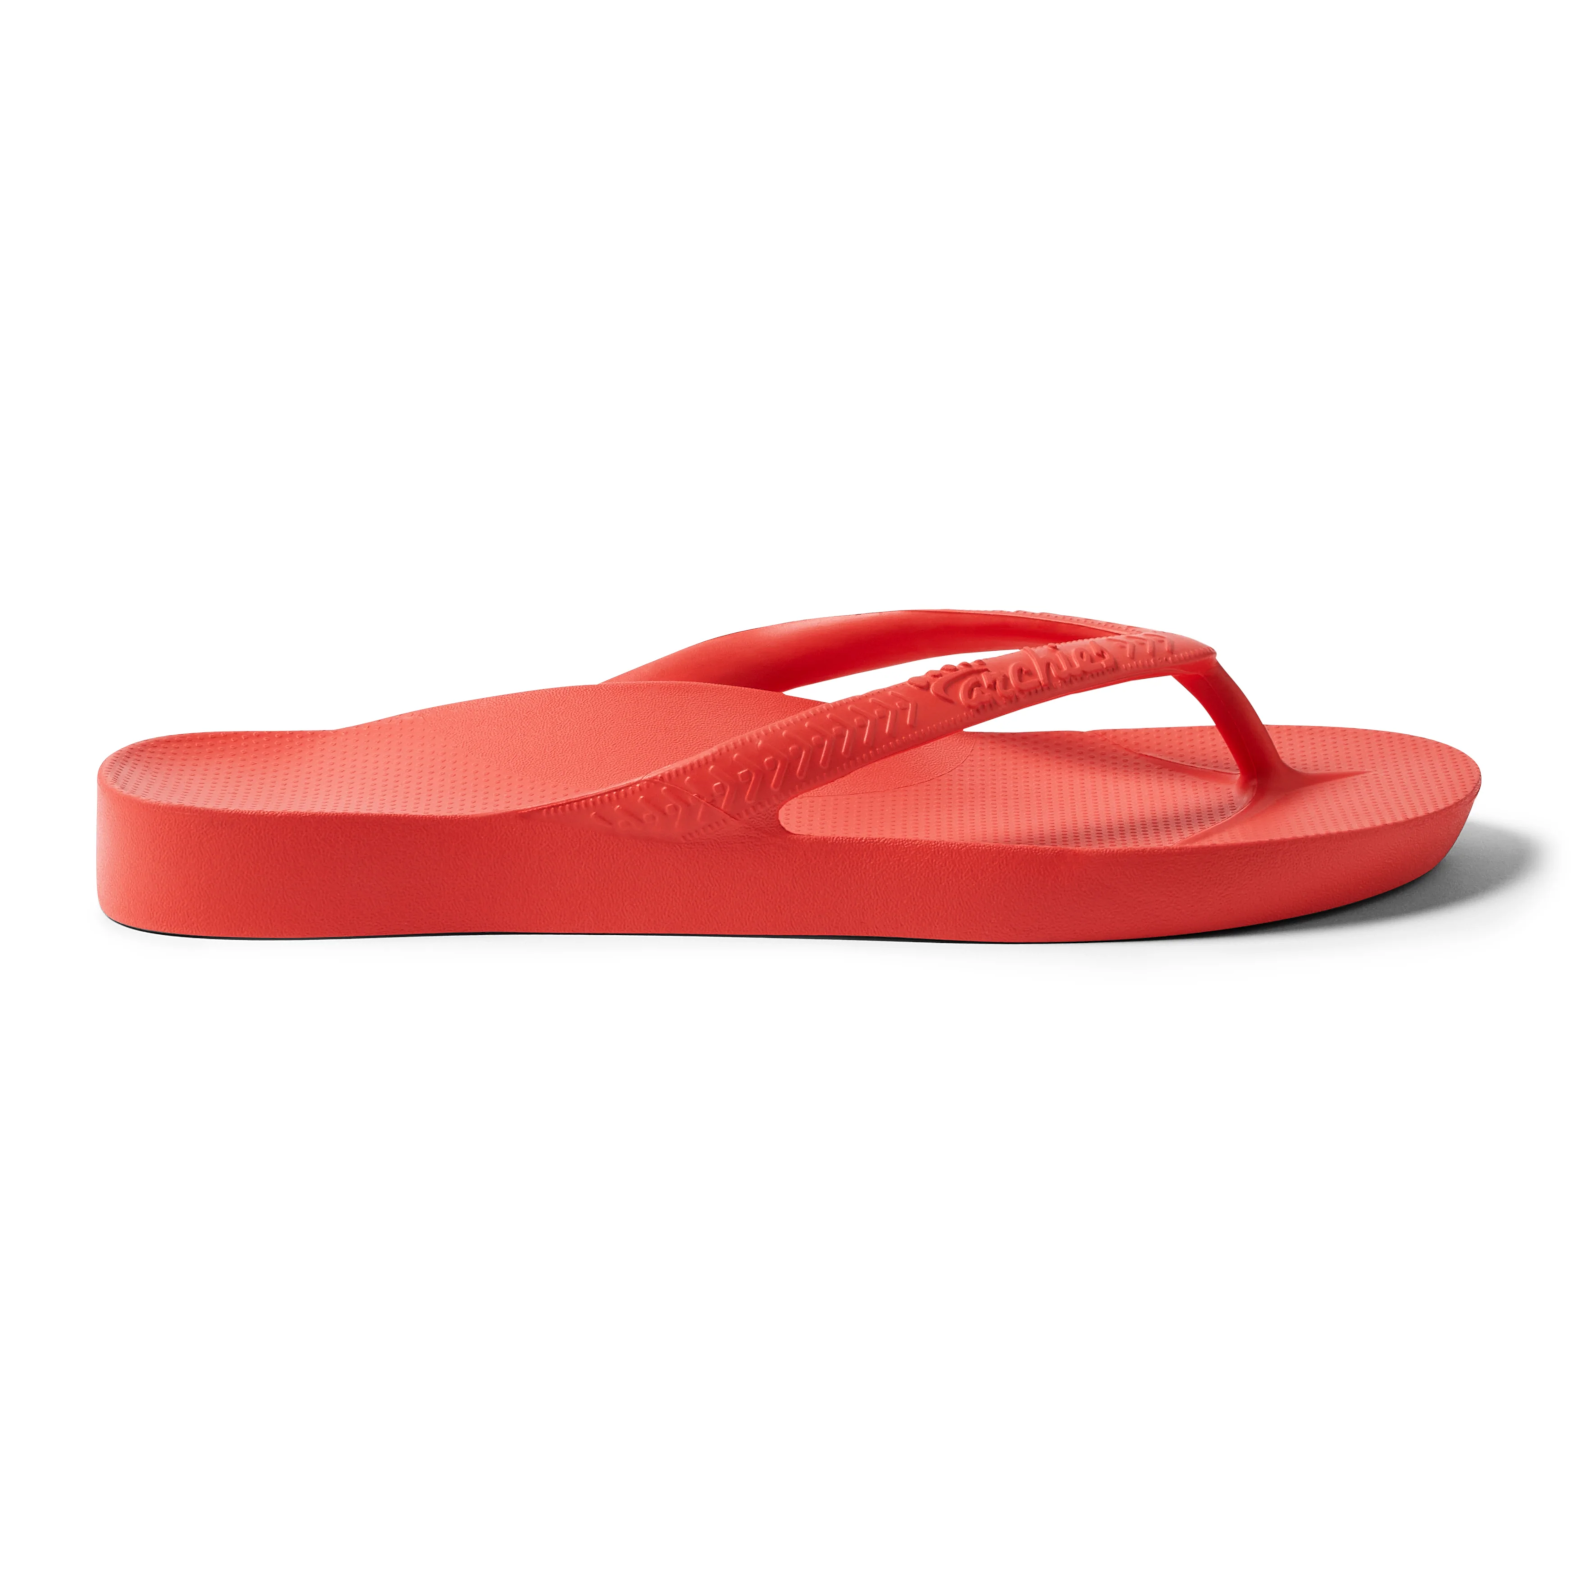 Archies Footwear Arch Support Jandals Coral – Lace Ups